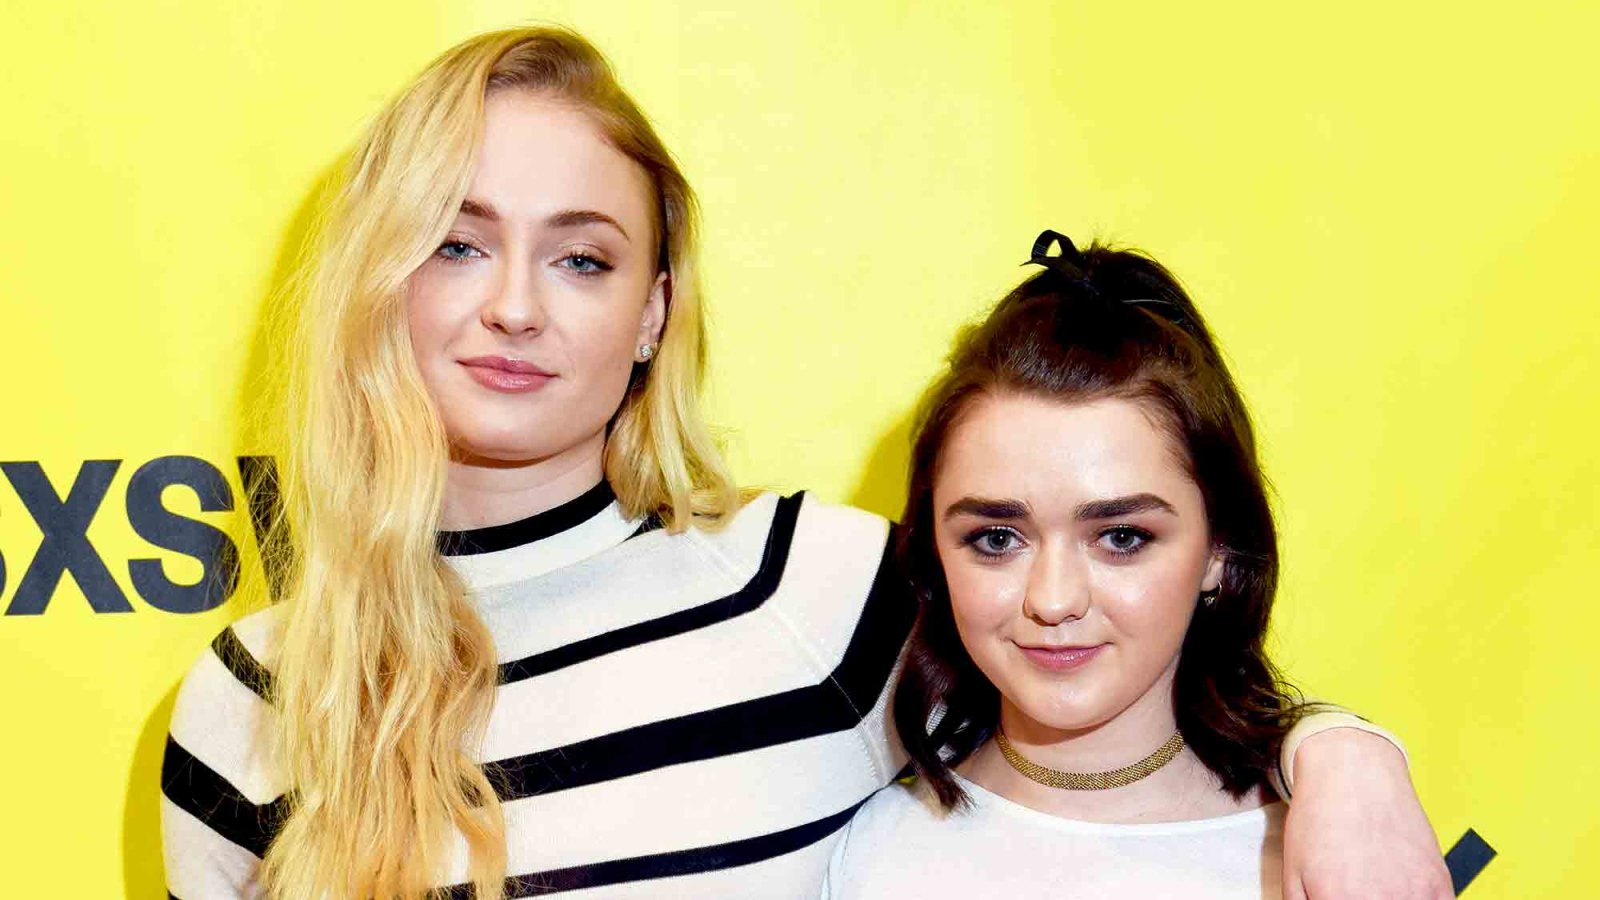 Sophie Turner and Maisie Williams attend the 2017 SXSW Conference and Festivals at Austin Convention Center in Austin, Texas.